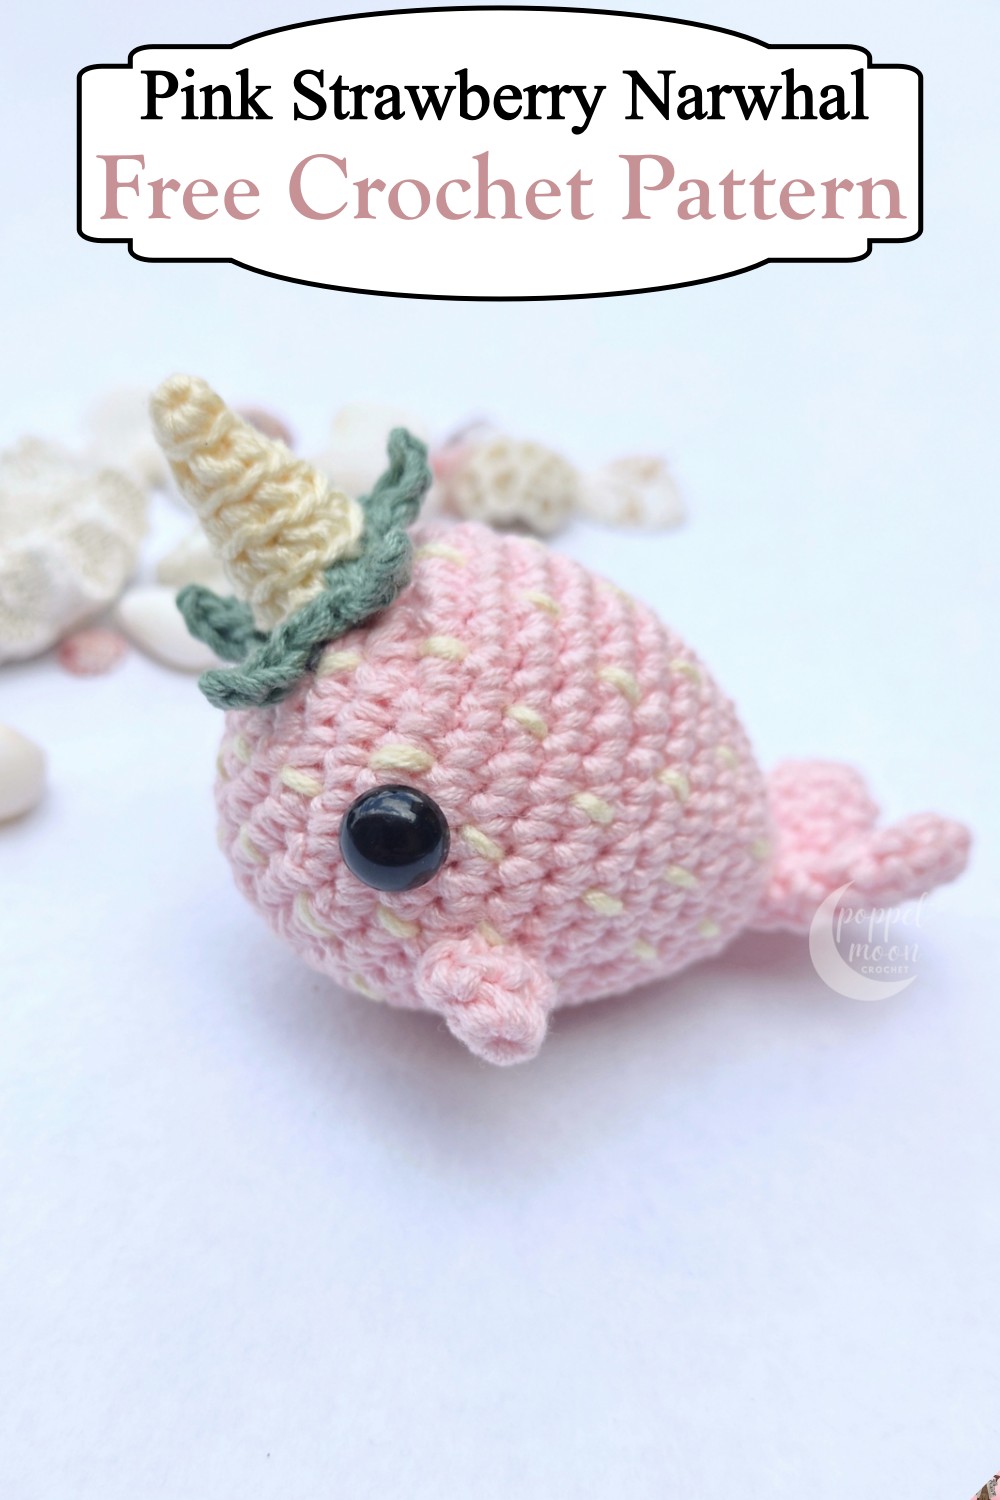 Pink Strawberry Narwhal